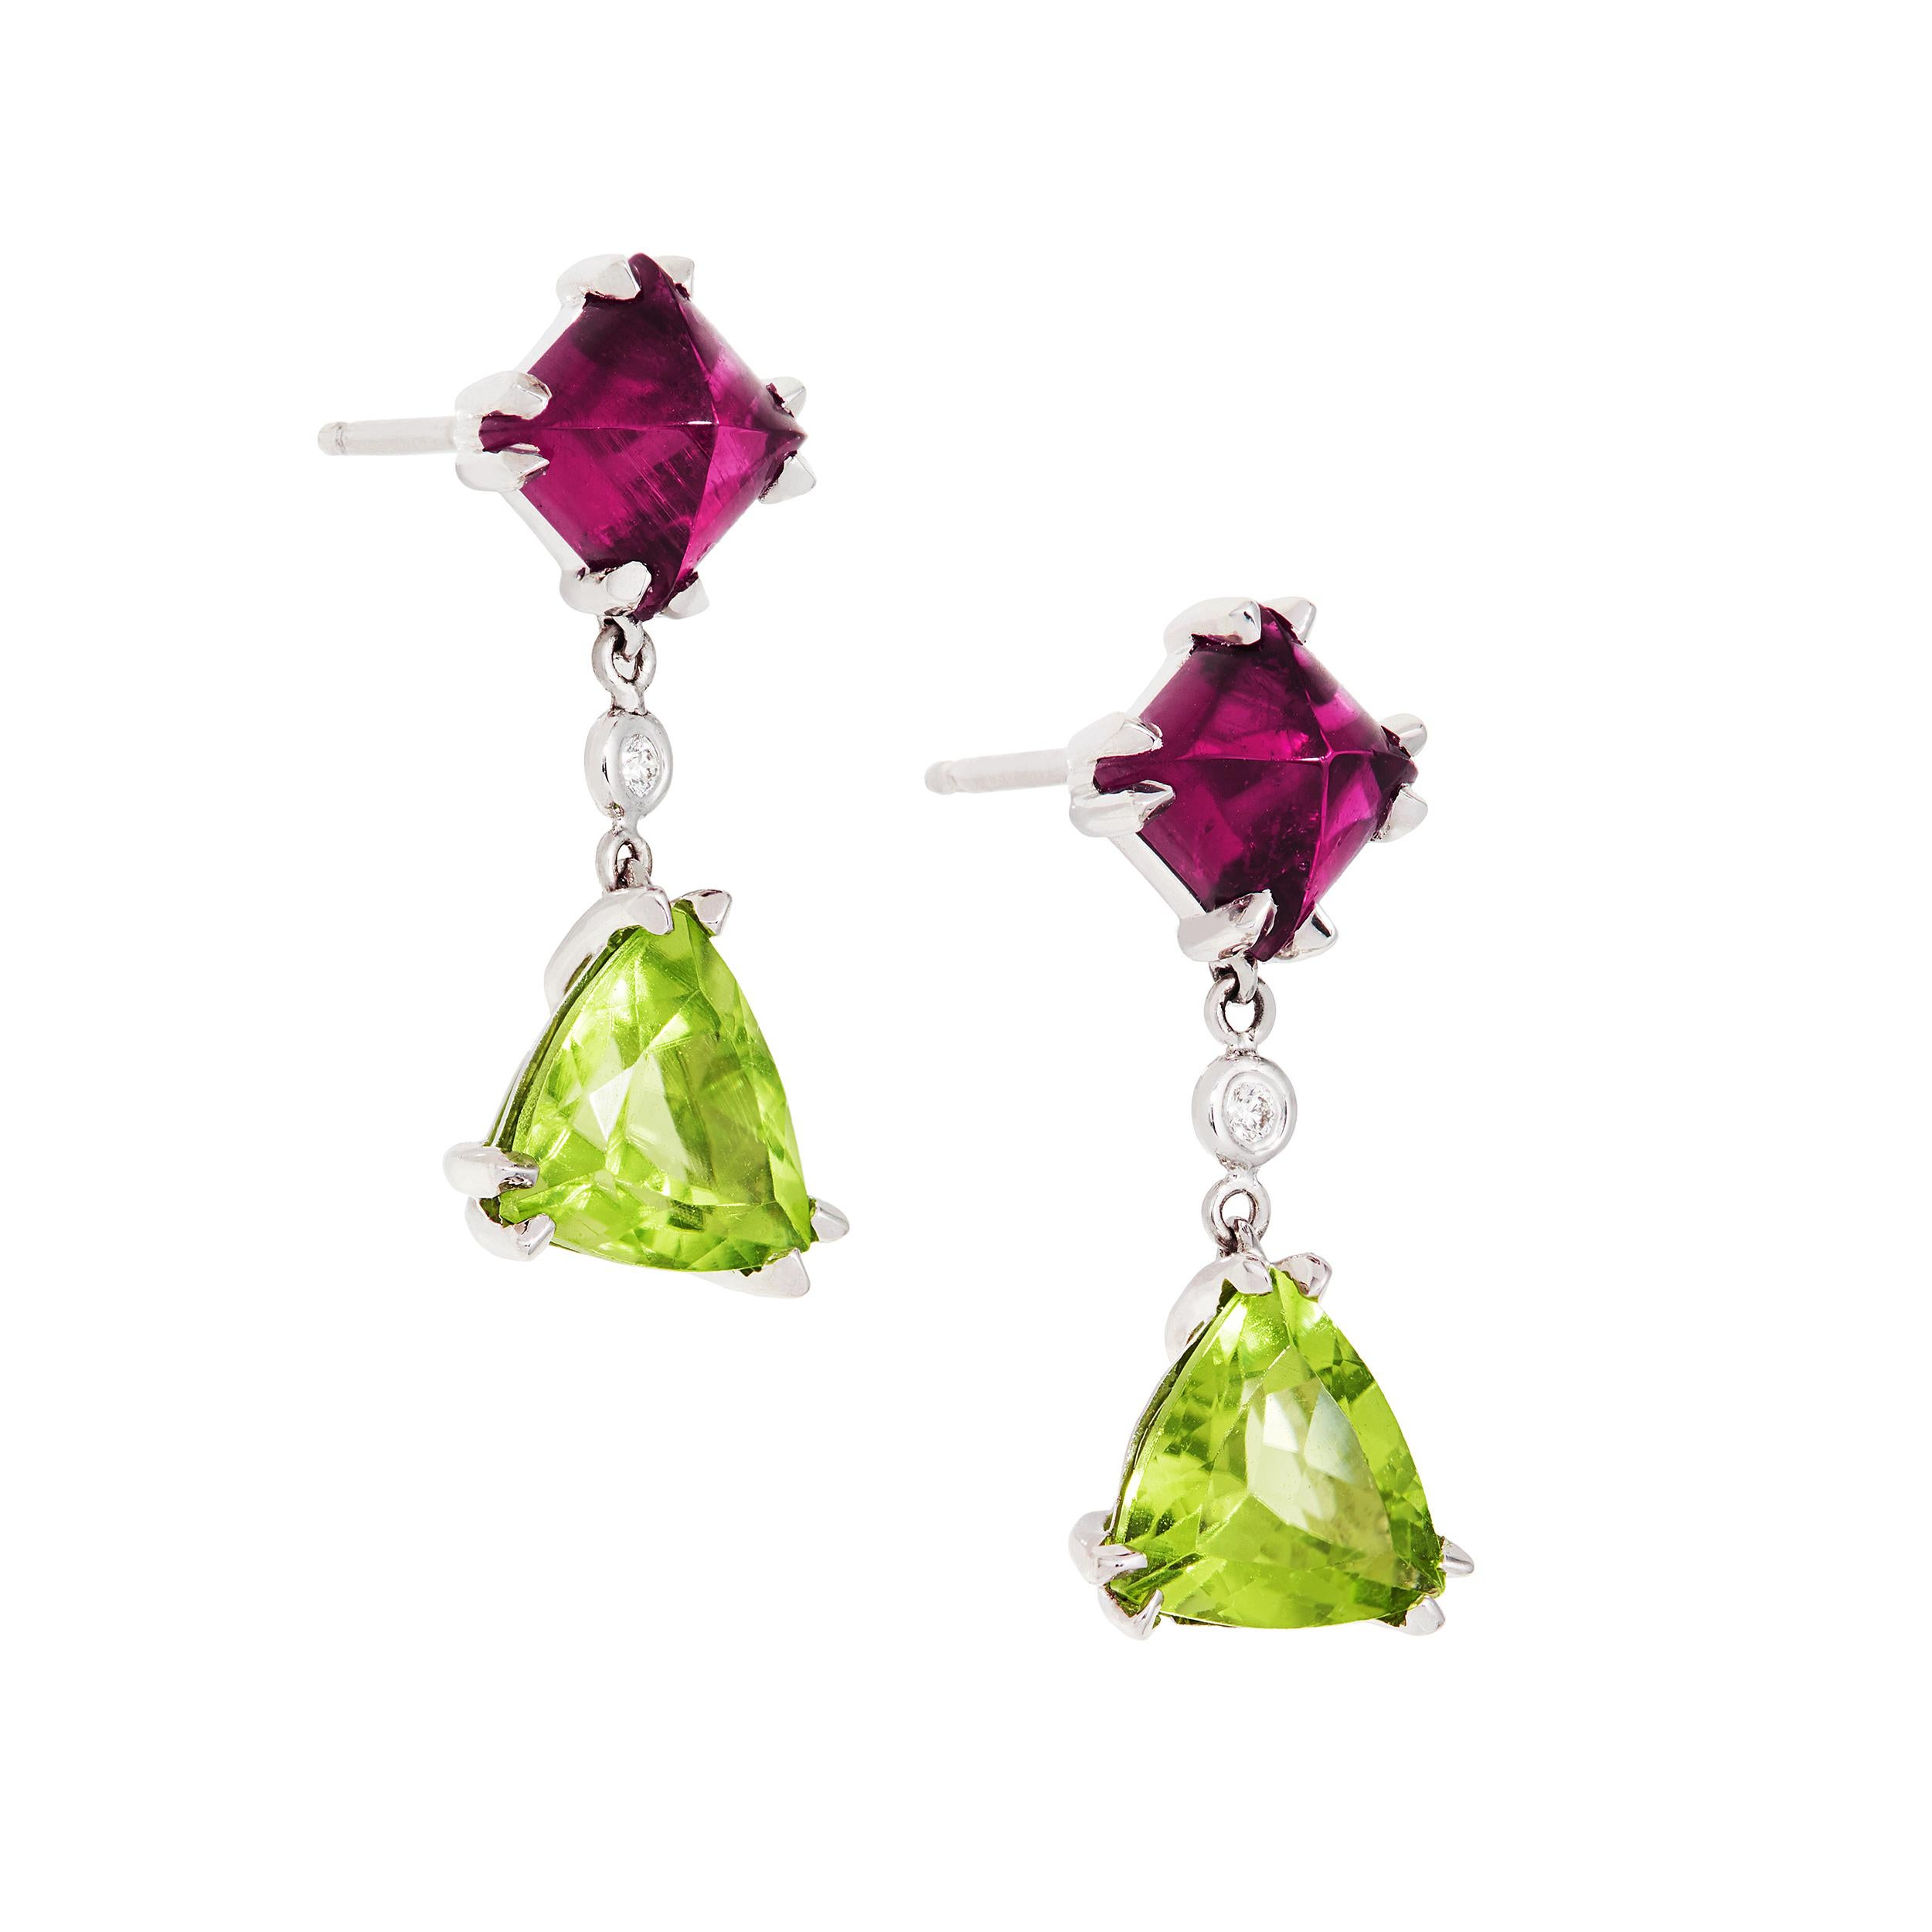 The play of color between the Sugarloaf Cut Rubellite Tourmaline and Peridot are reminiscent of a sweet shop with their vibrance and frivolity. Part of a one of a kind Kiersten Elizabeth set where comfort and versatility are paramount.

These